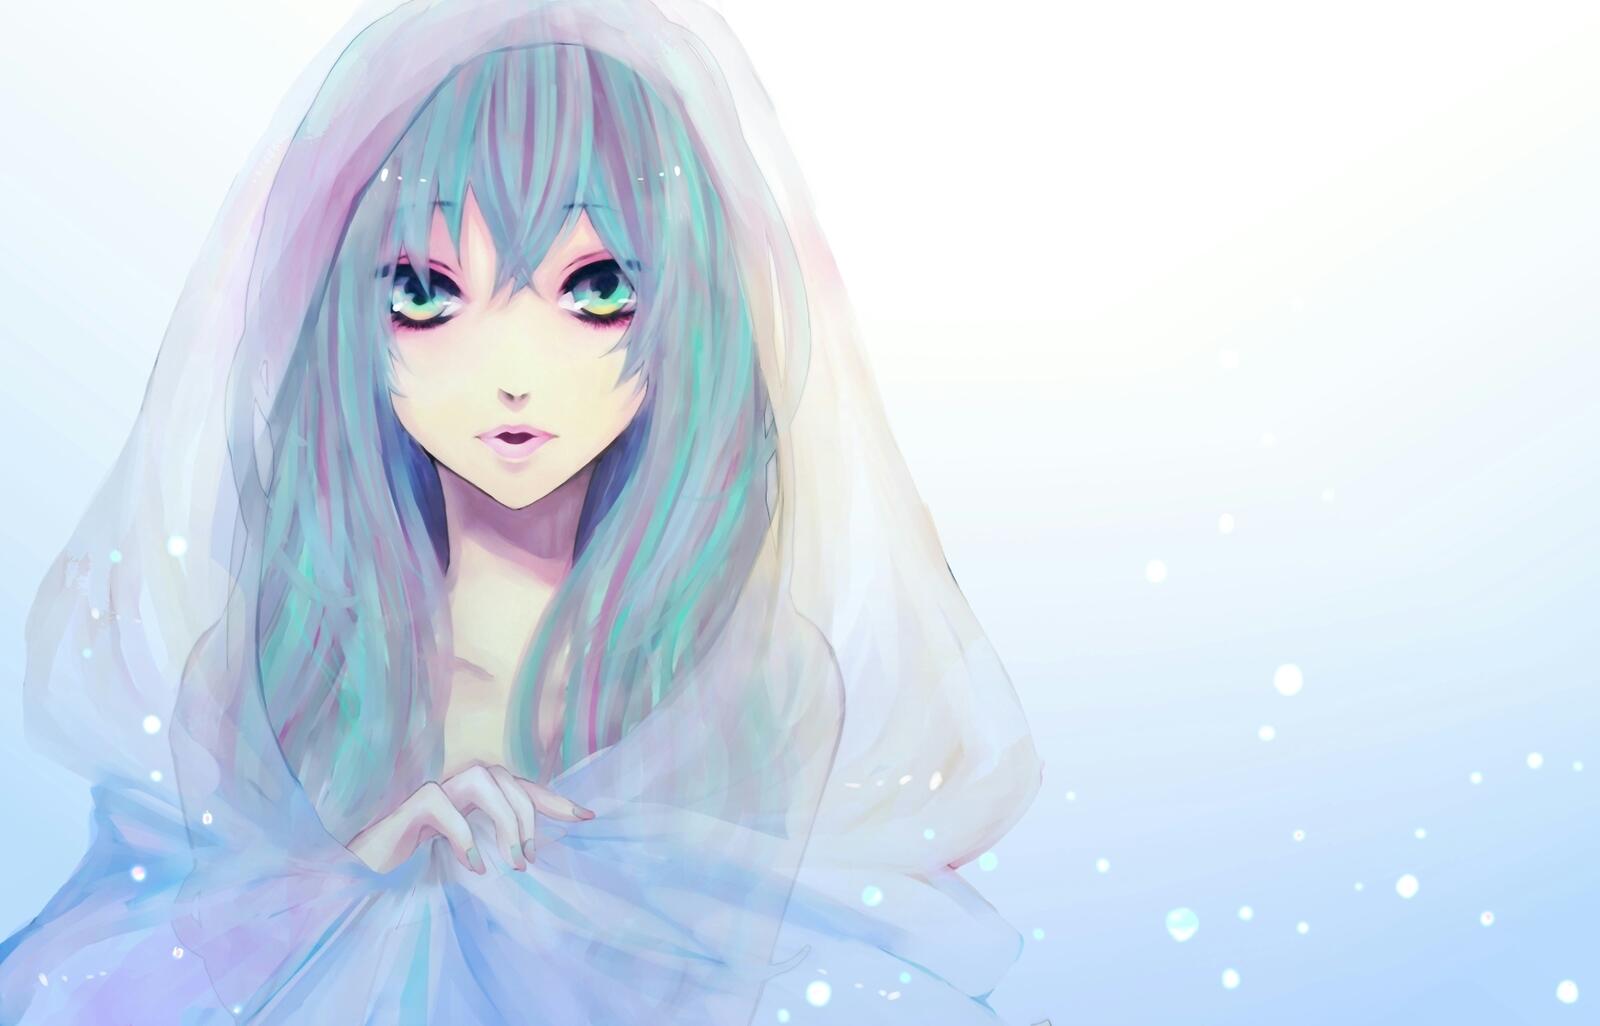 Wallpapers vocaloid drawing girl on the desktop